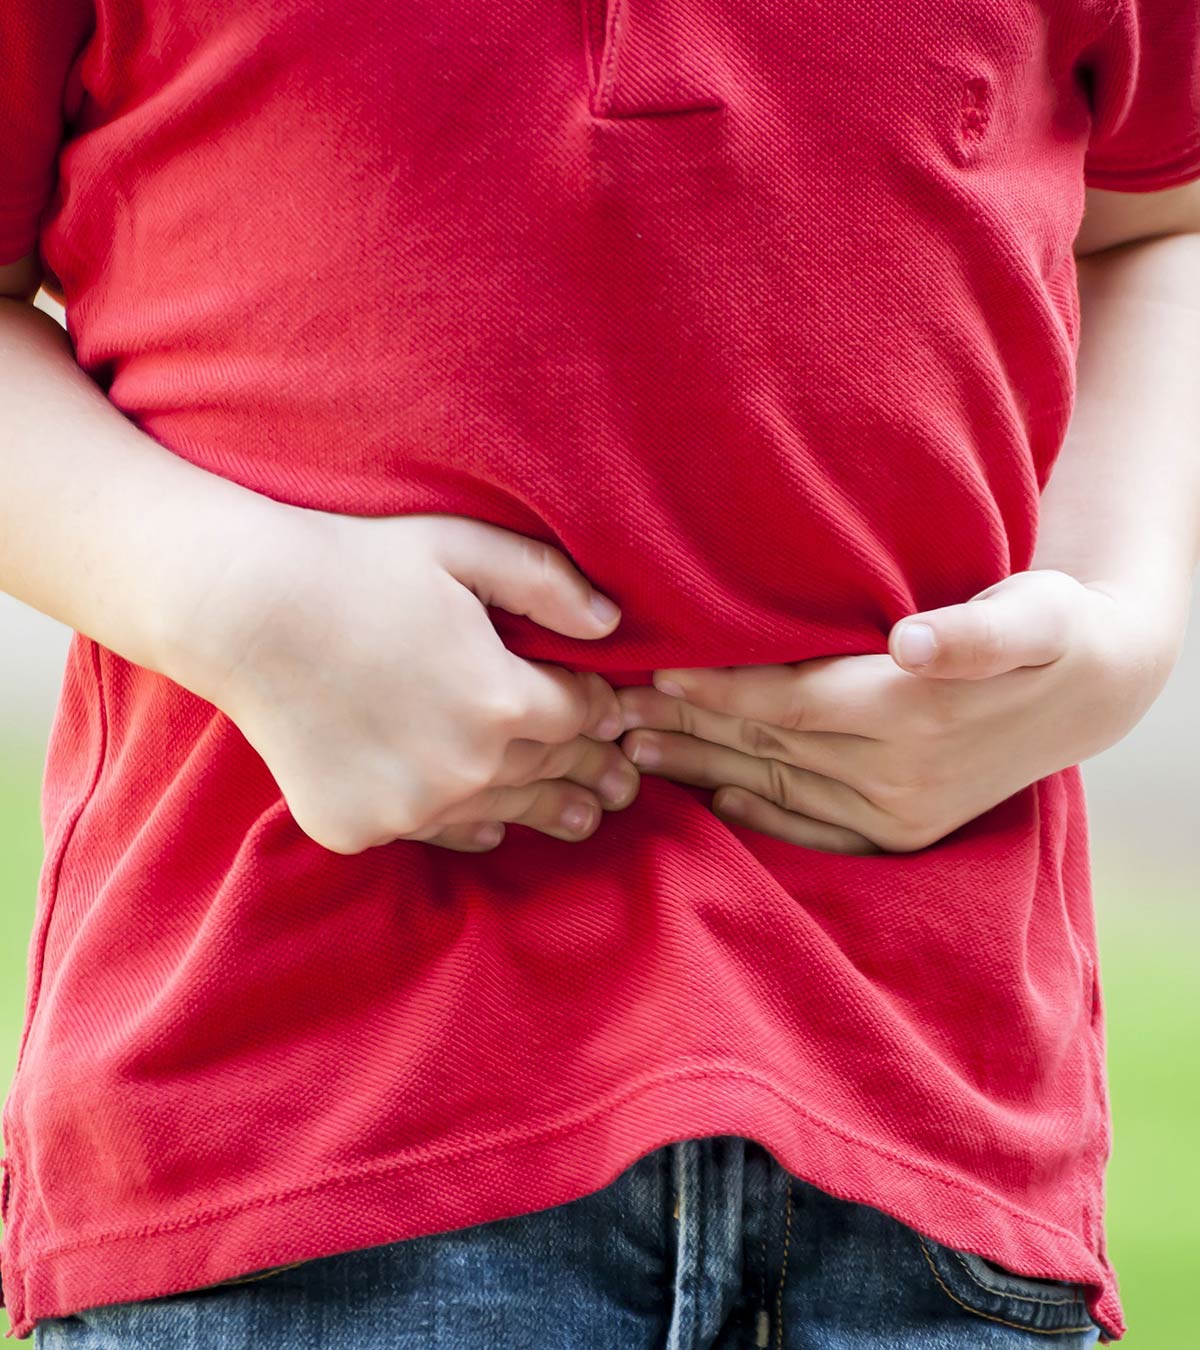 Diarrhea In Children: Causes, Symptoms And Helpful Home Remedies